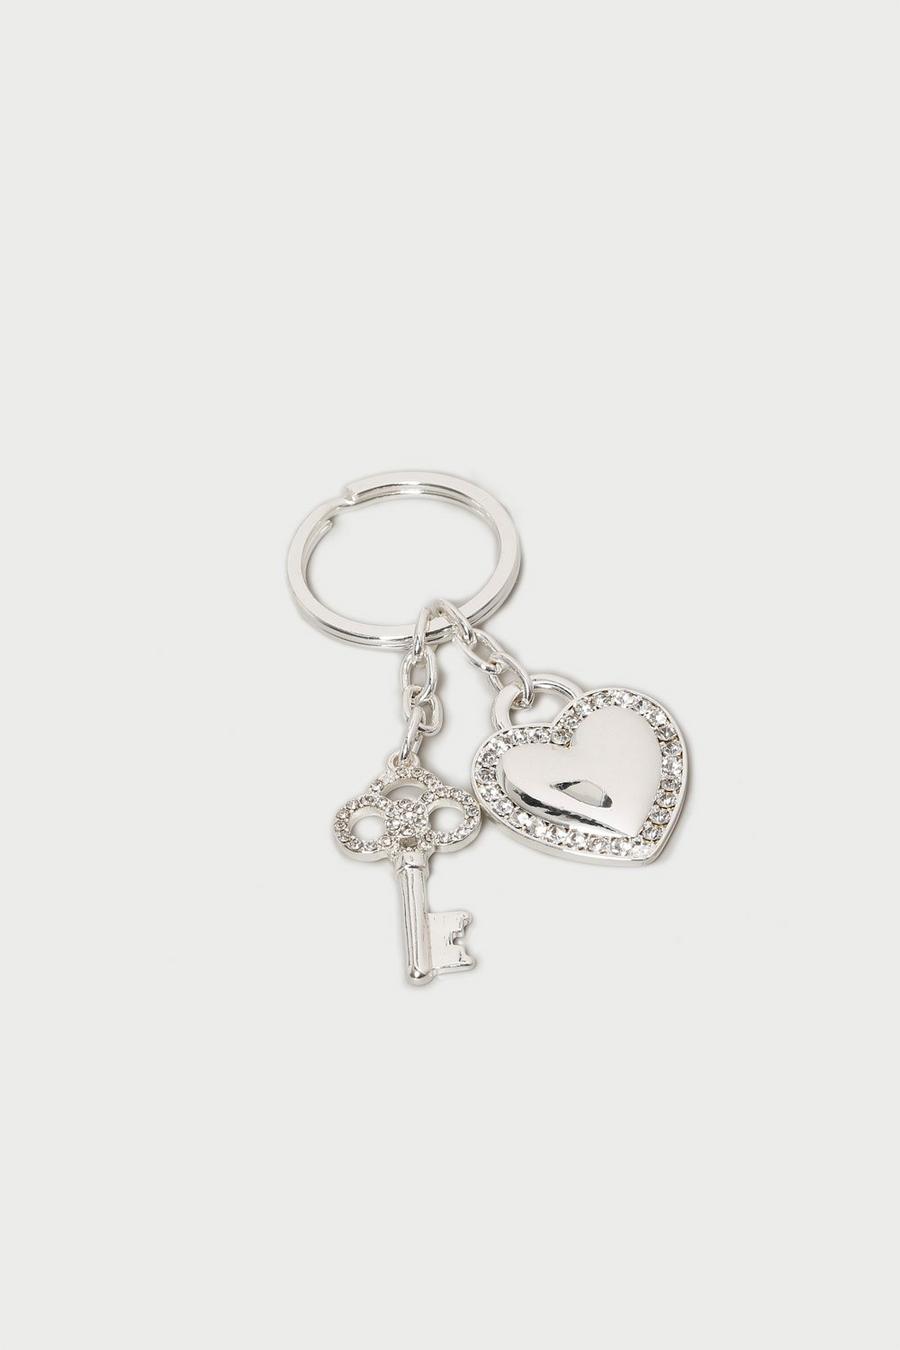 Silver Heart And Key Charm Key Ring